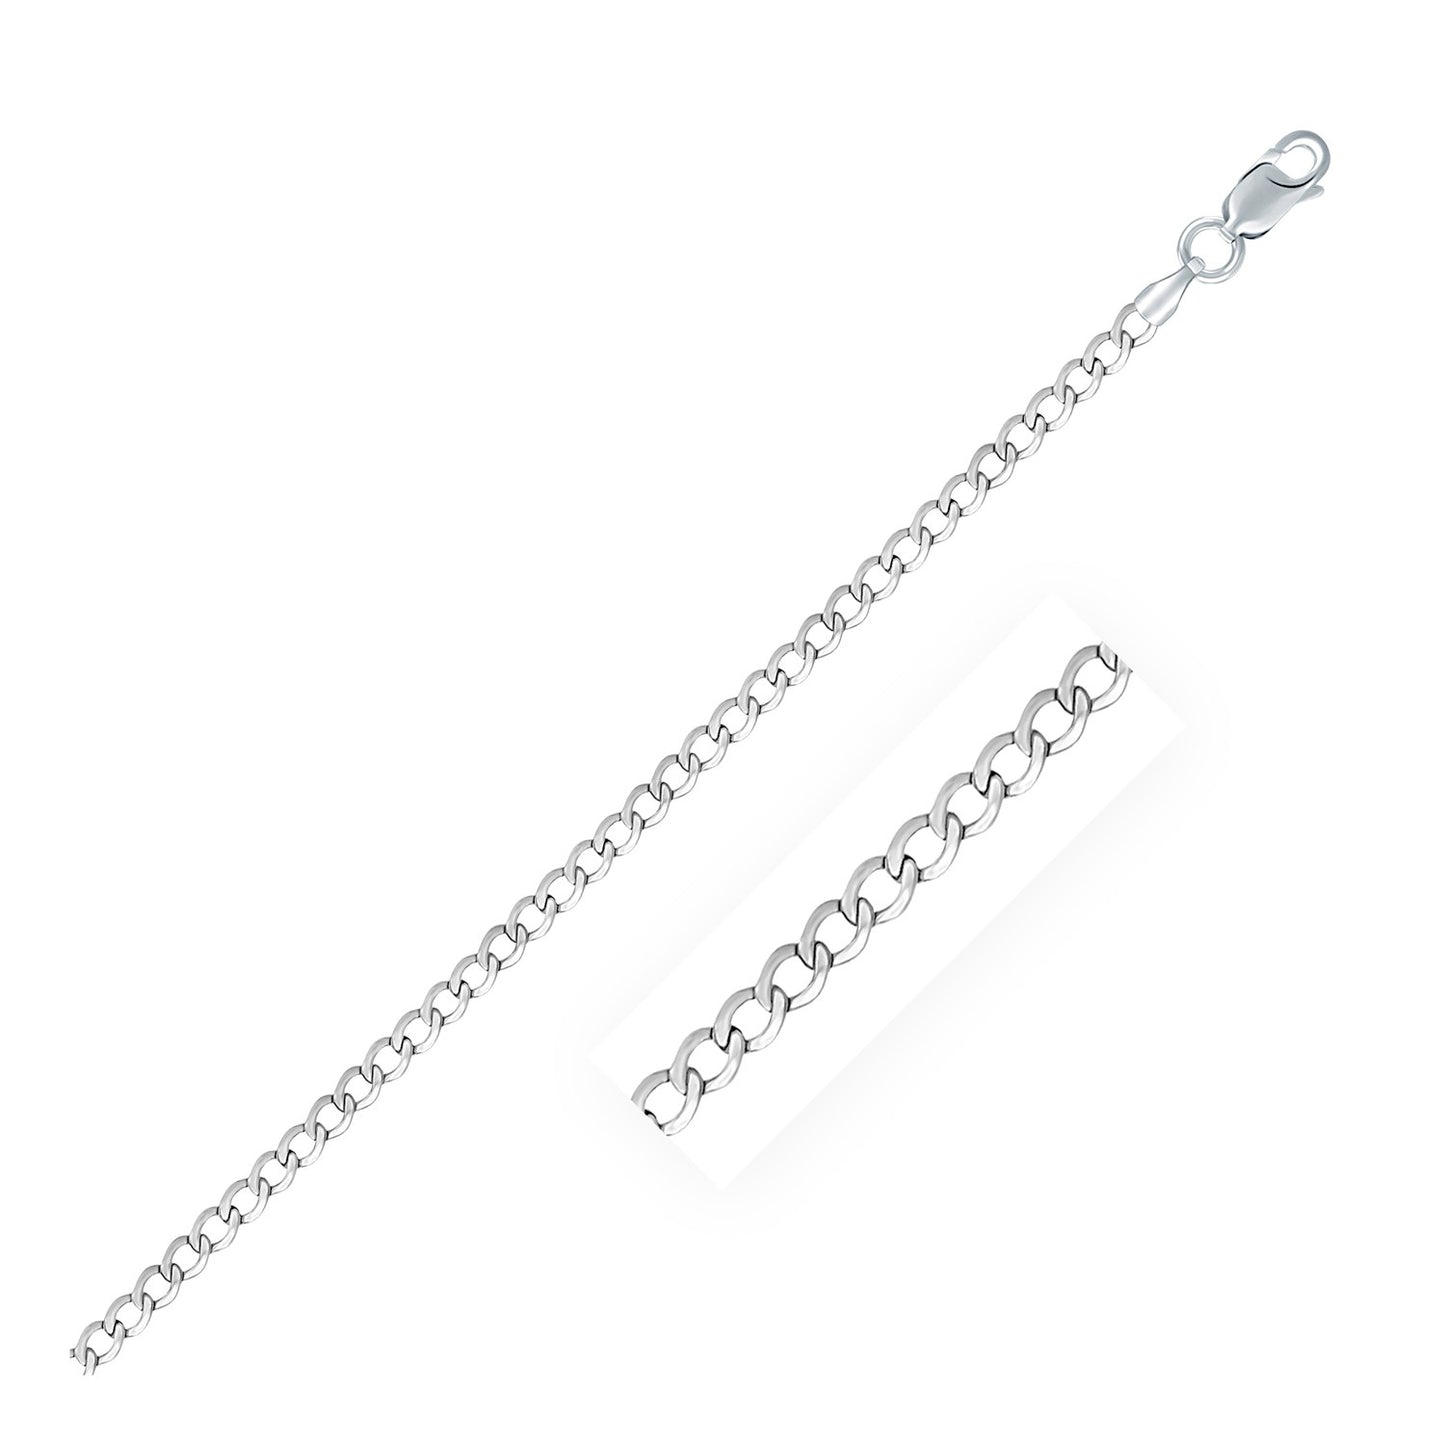 Rhodium Plated 3.0mm Sterling Silver Curb Style Chain